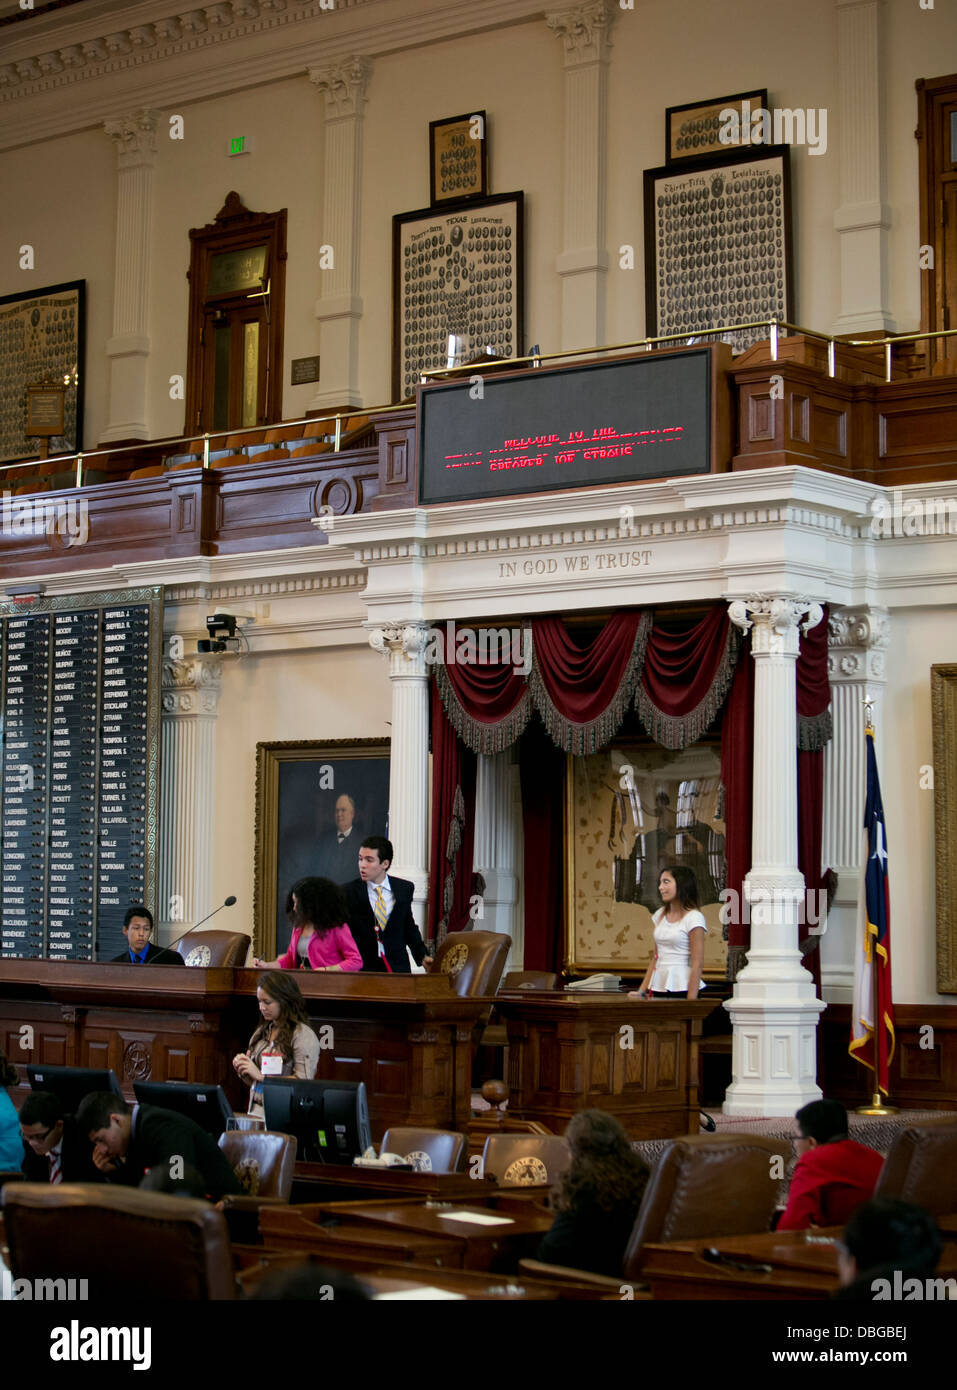 High school students participate in a mock legislative session at the Texas State Capitol in Austin, Texas. Stock Photo